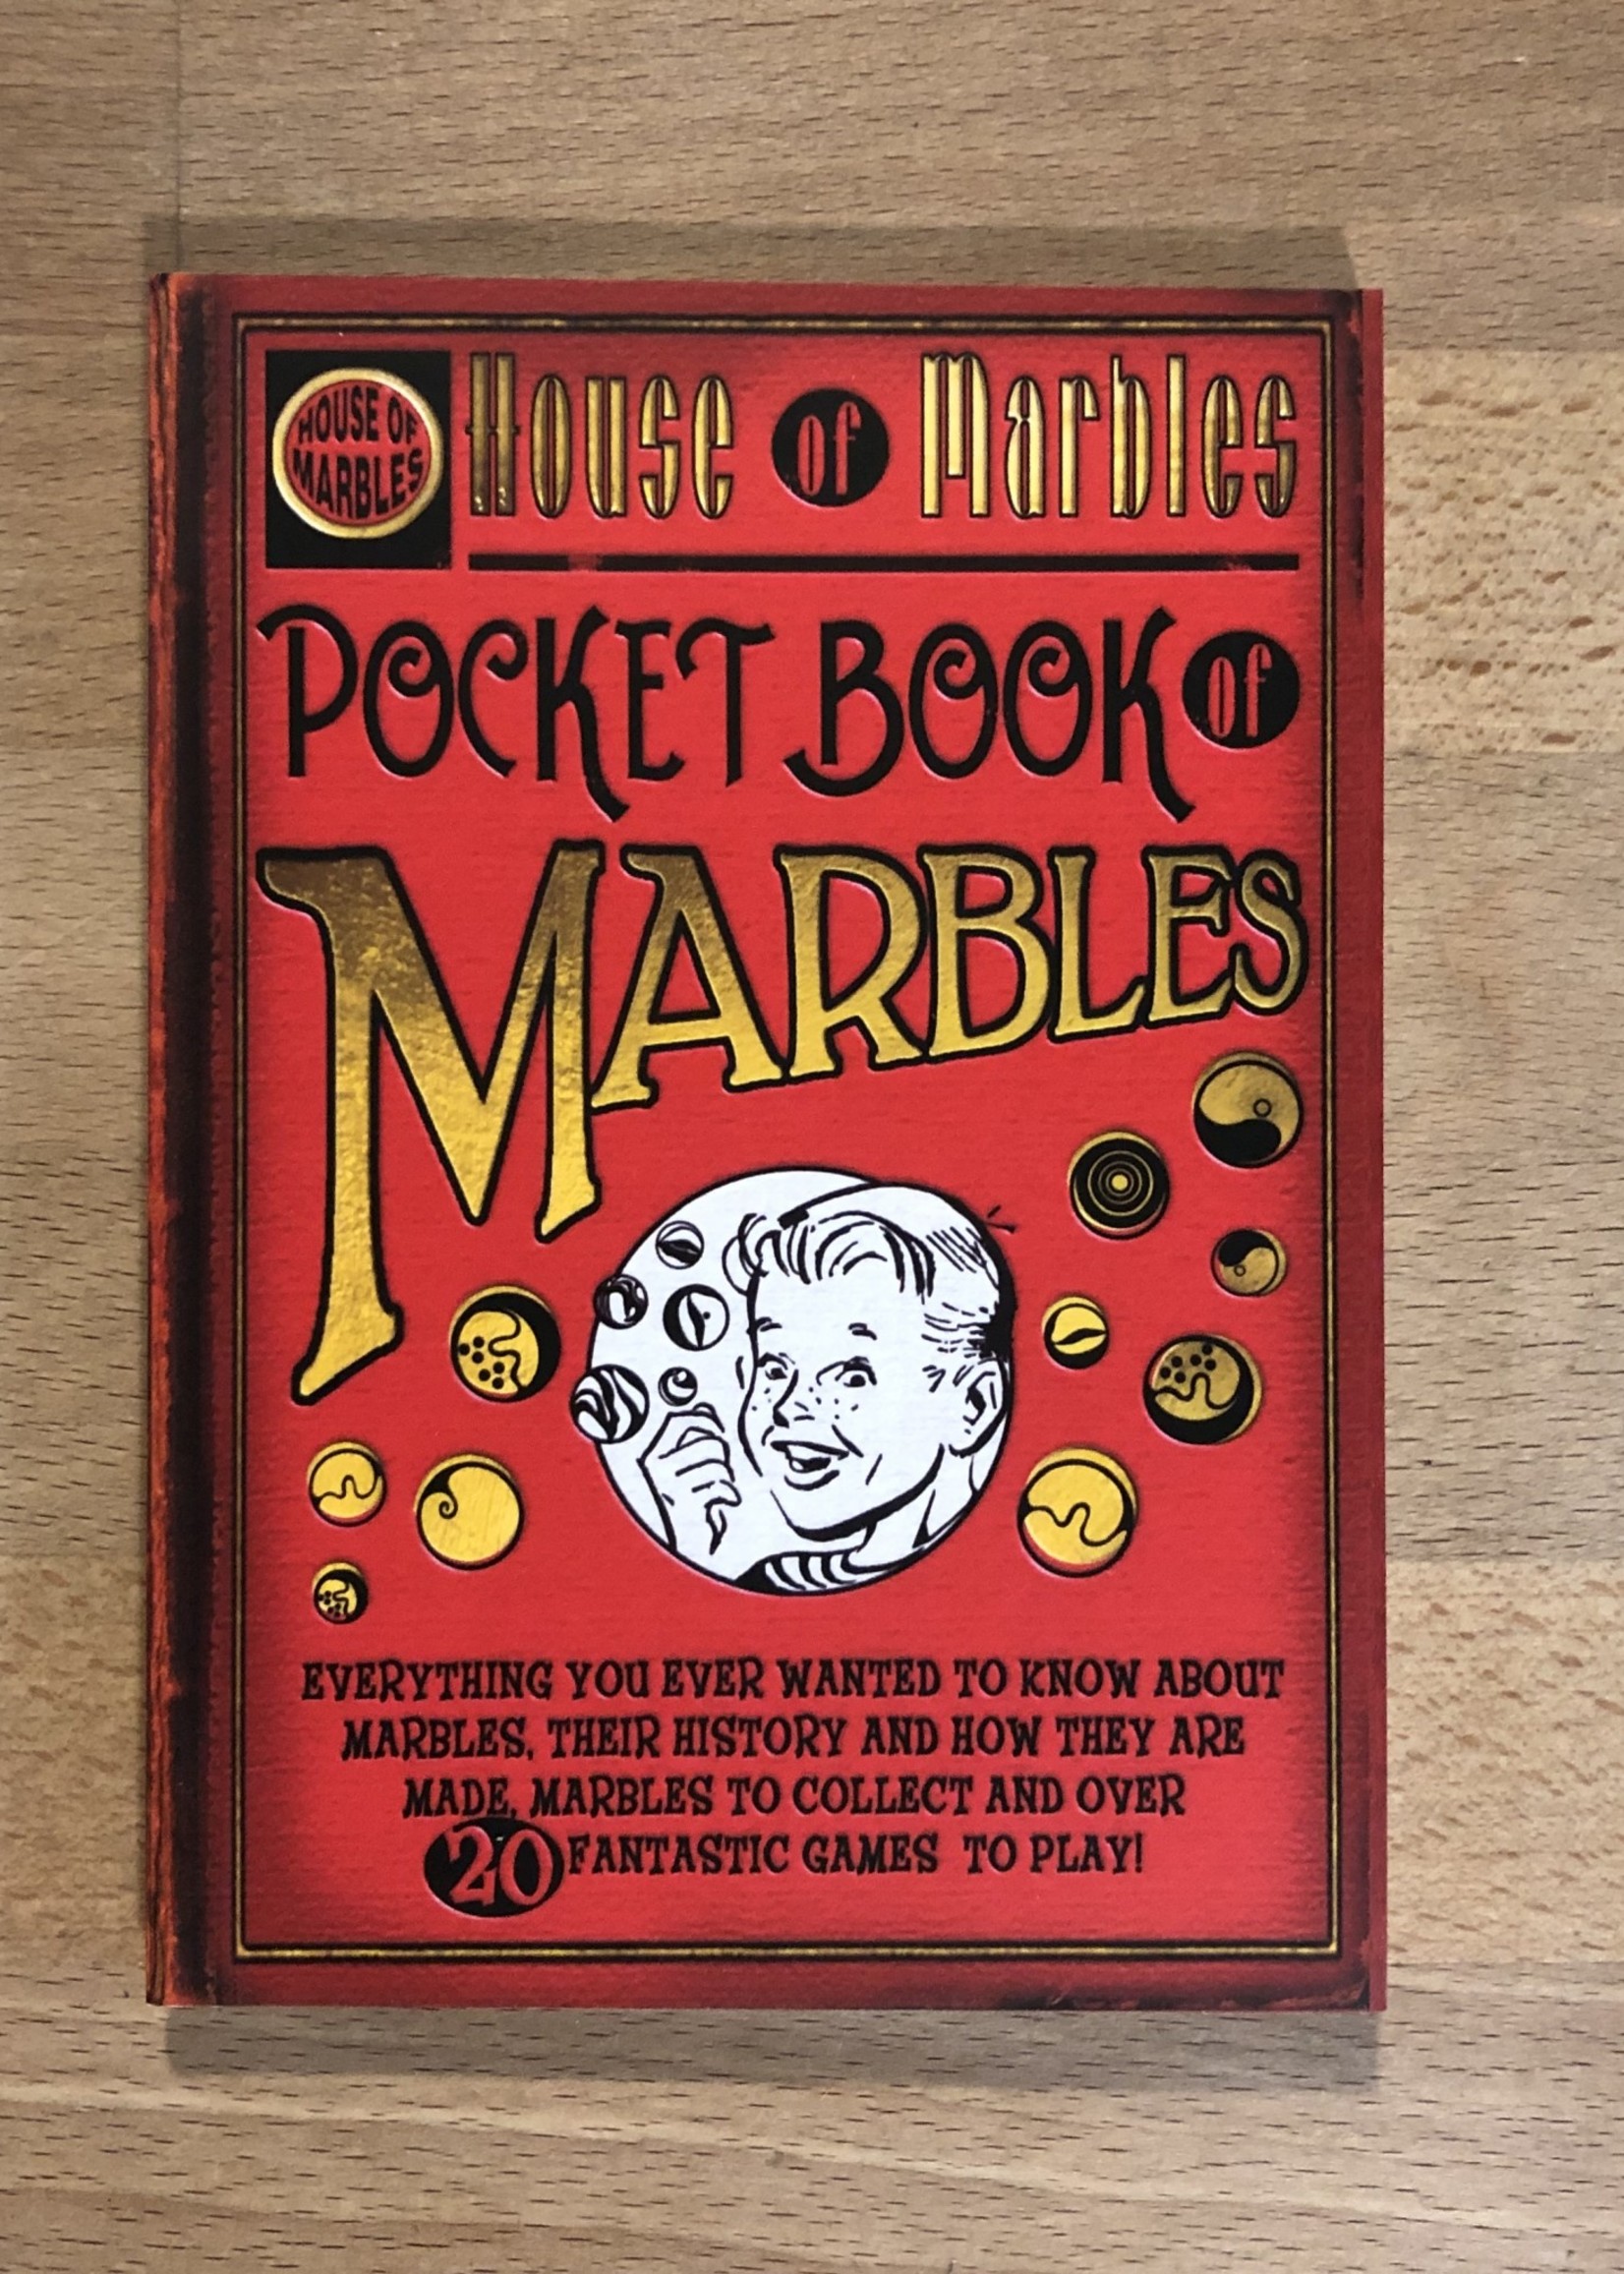 Pocket Book of Marbles